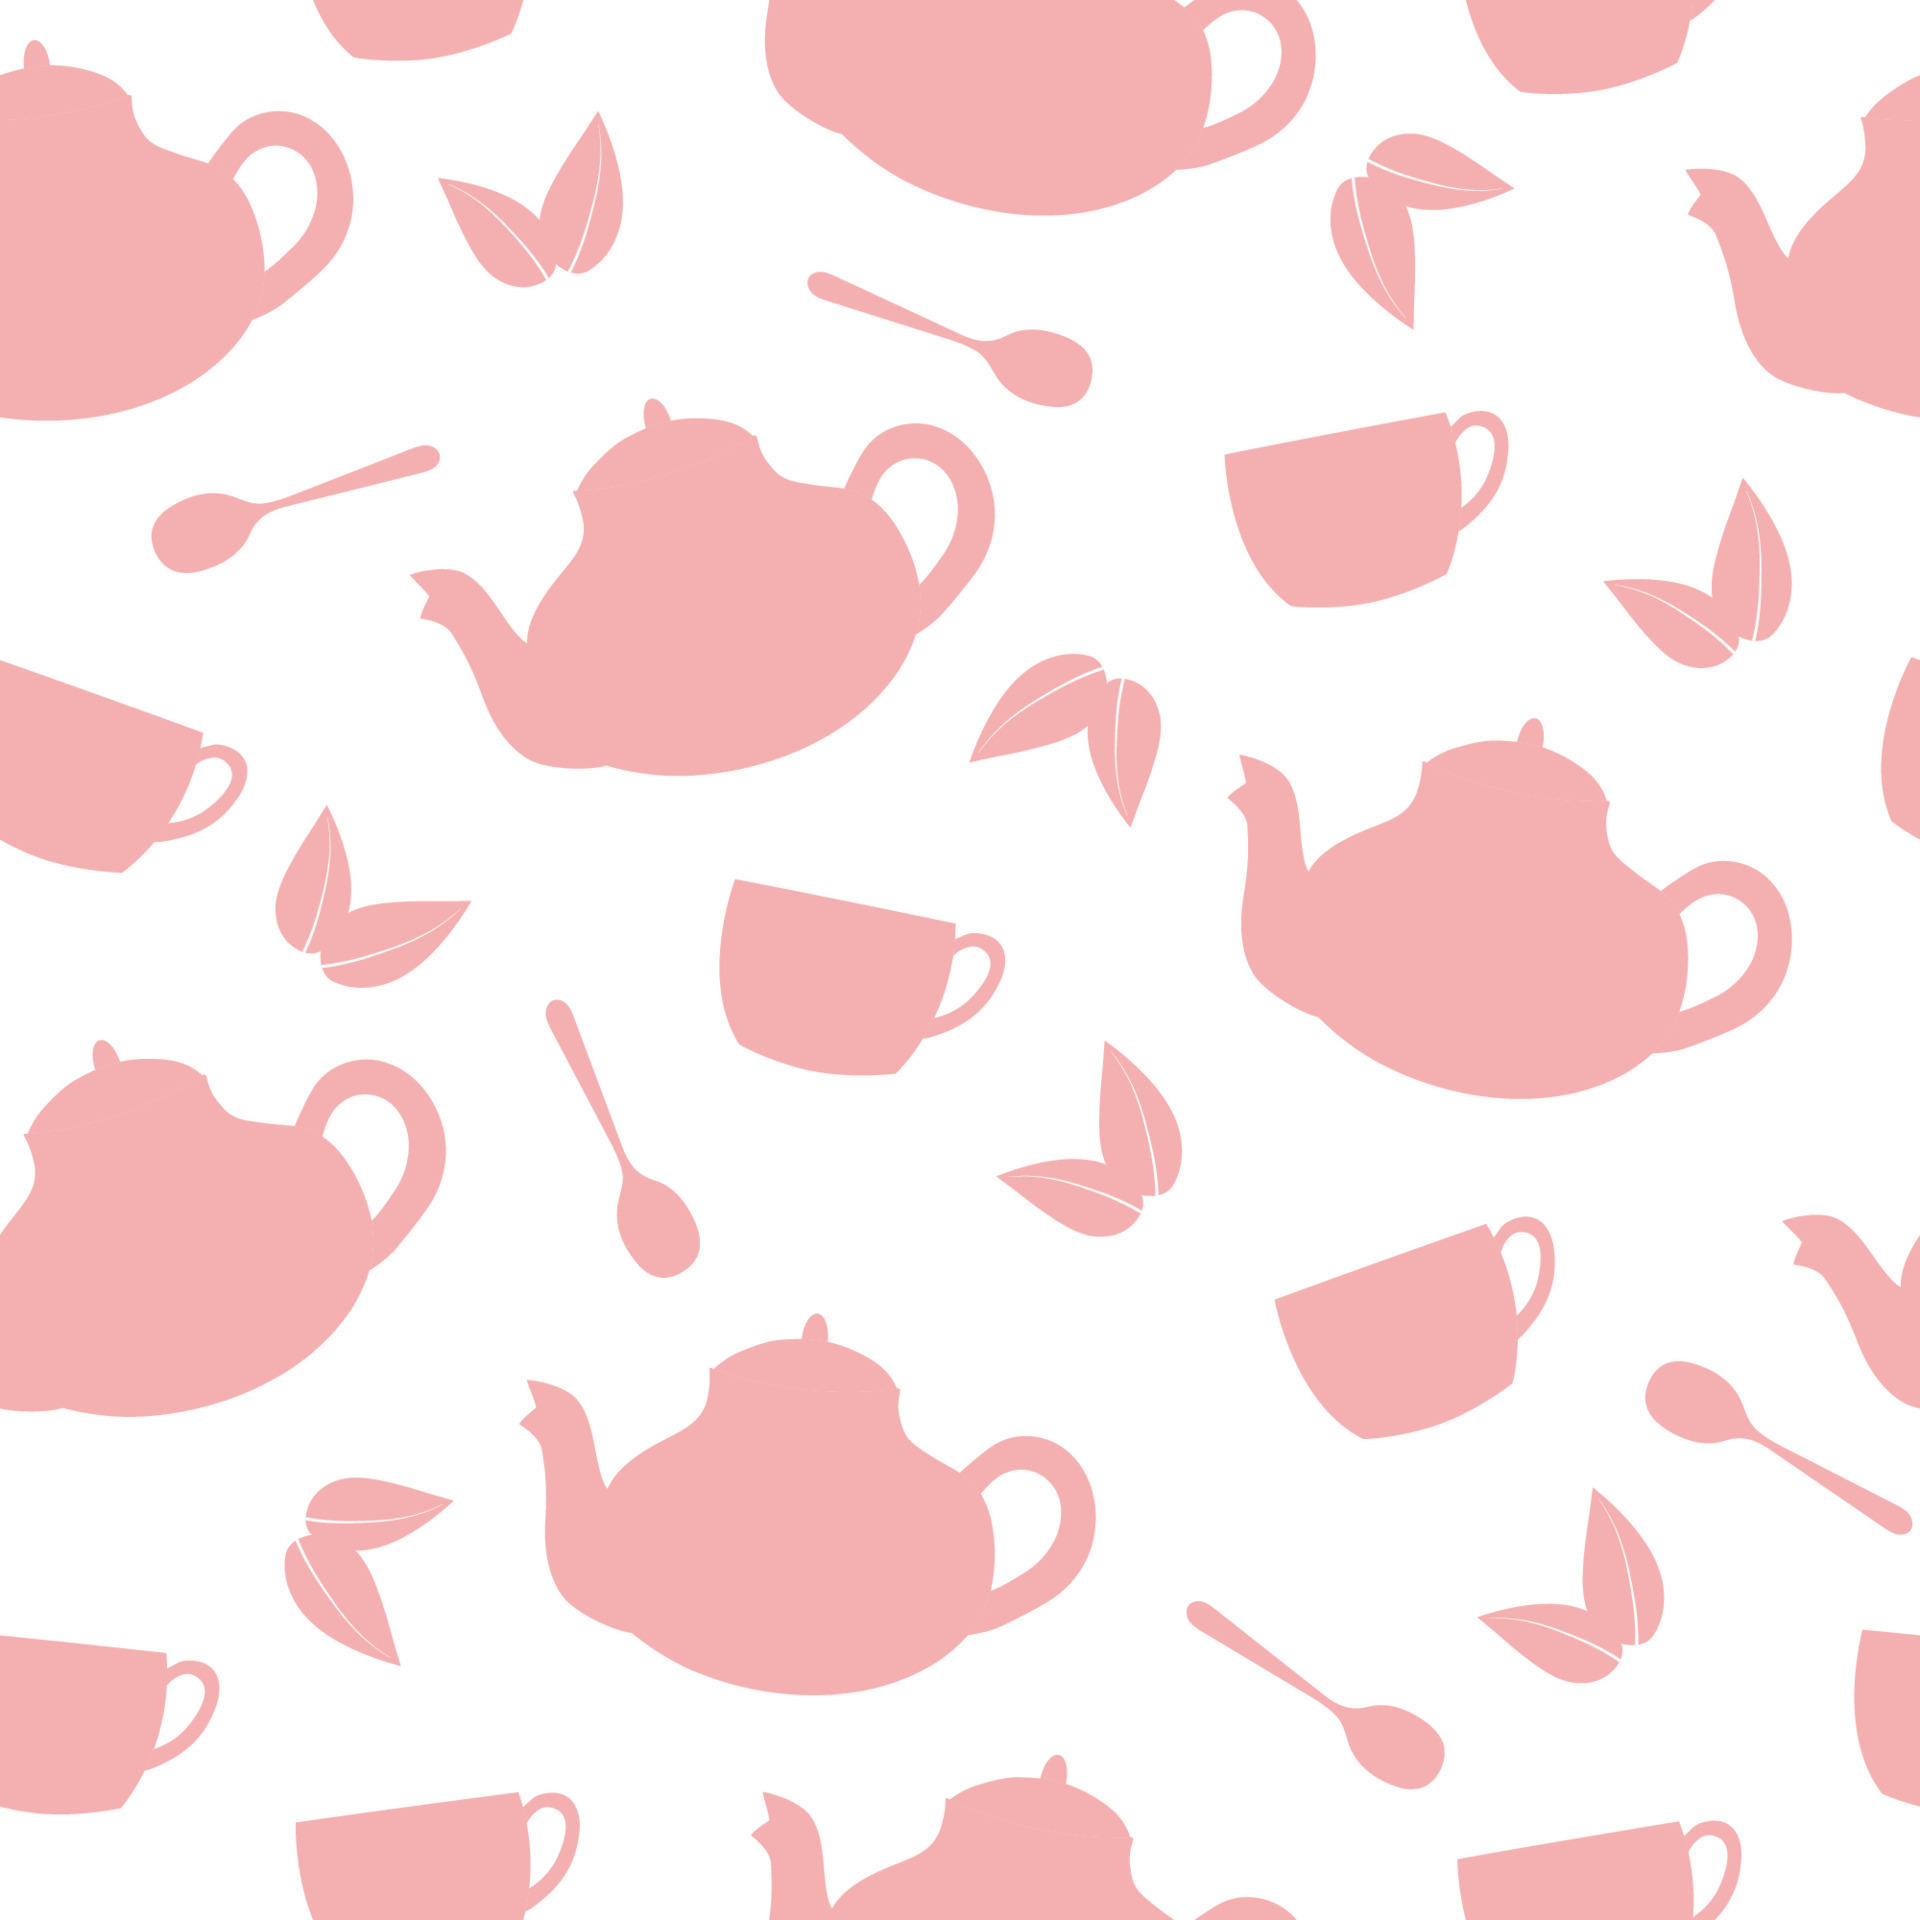 1920x1920 Seamless pattern of pink teapots, cups, spoons and leaves on white background. 5694895 Vector Art